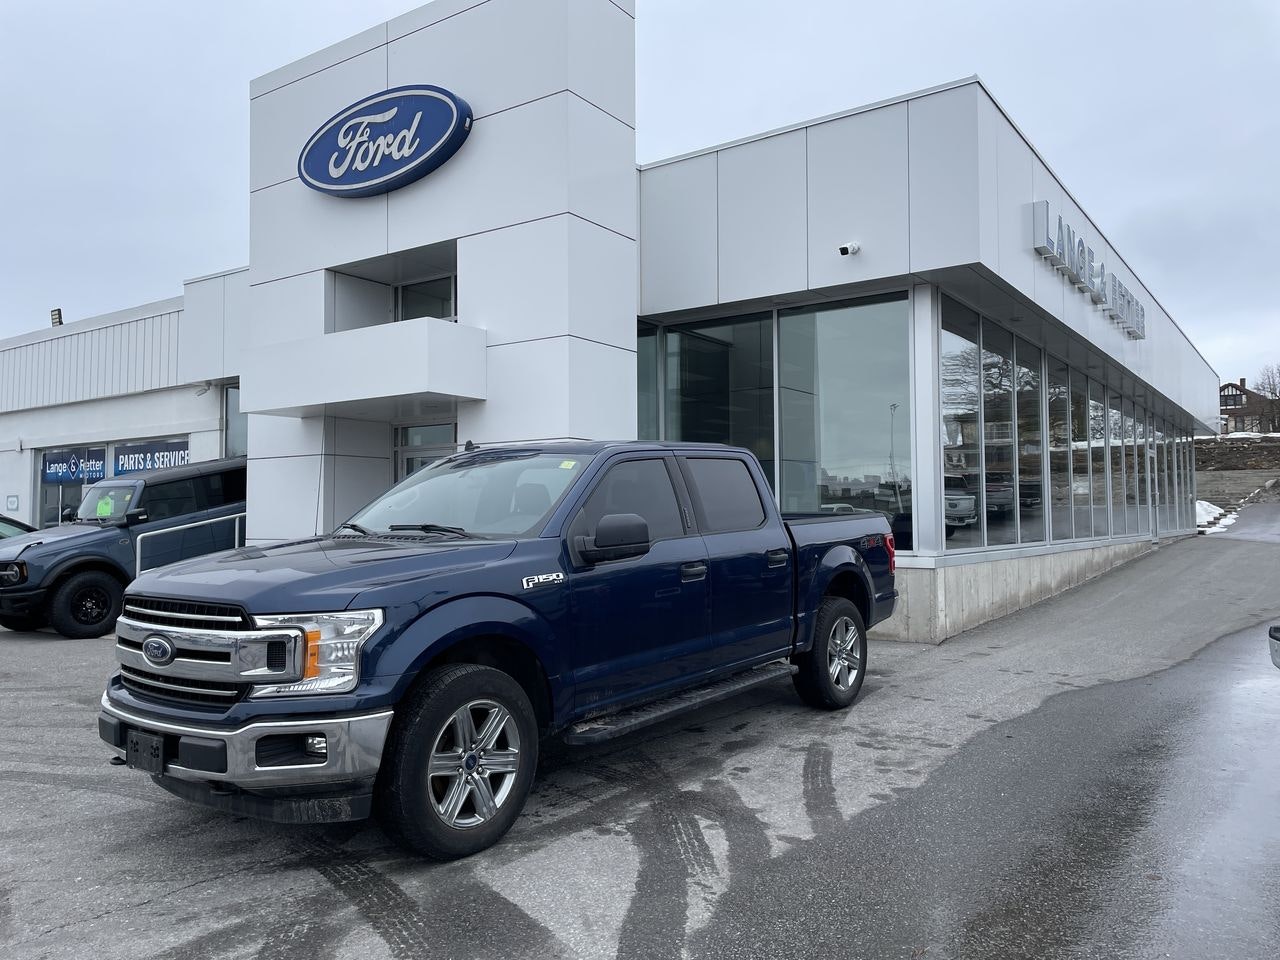 2020 Ford F-150 - P21445A Full Image 1